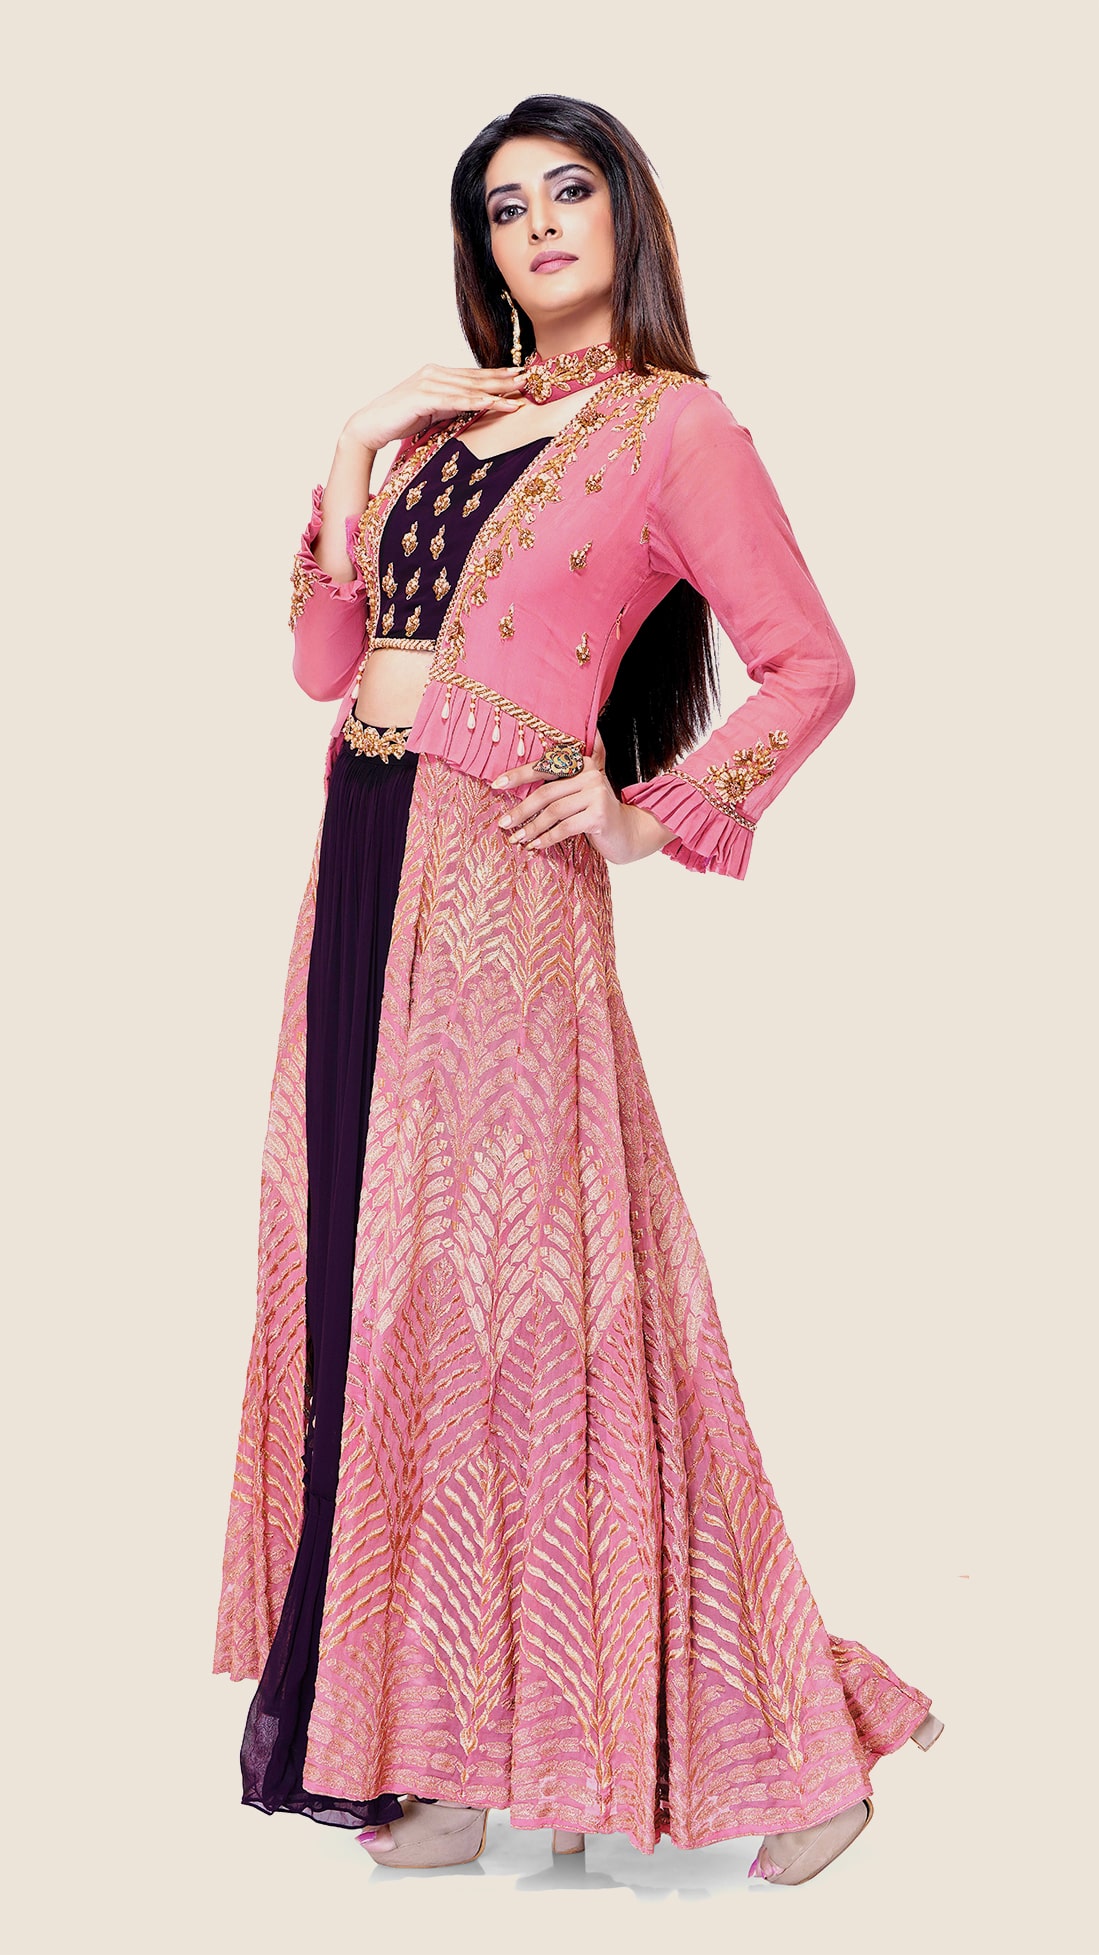 Womens Indo- western Jacket Style Anarkali Gown - MainRoad.in